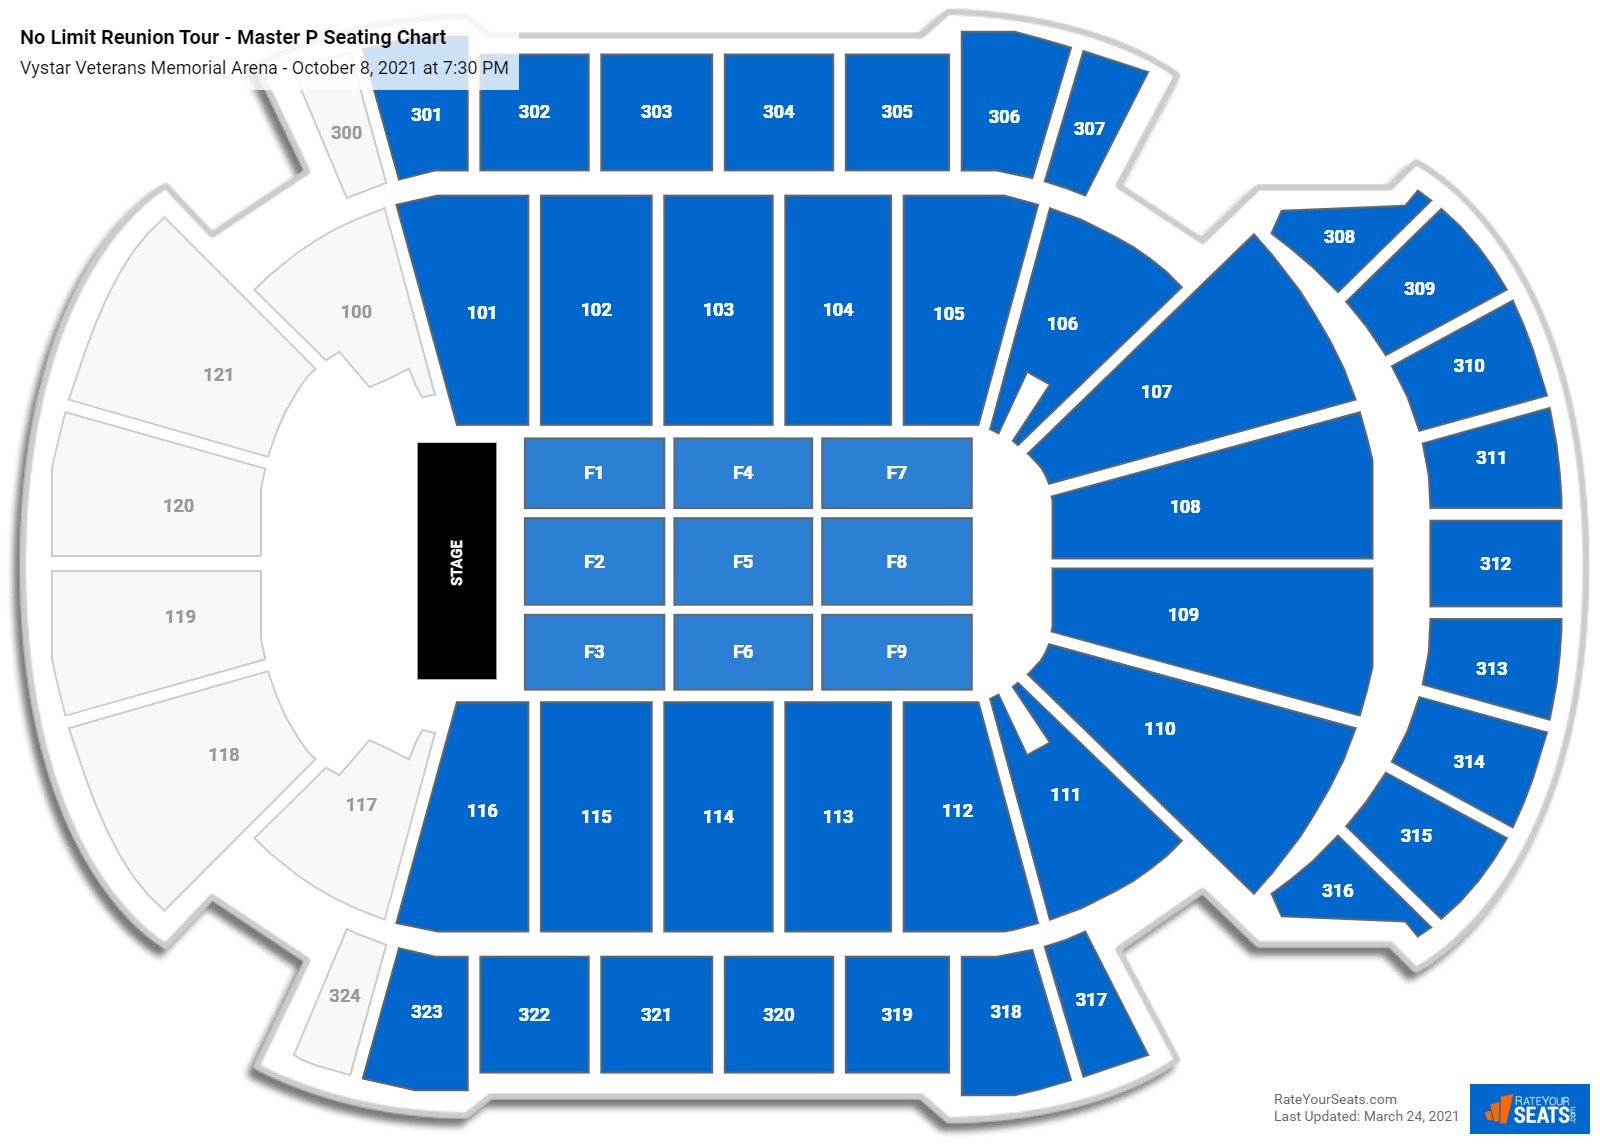 Vystar Veterans Memorial Arena Seating Charts for Concerts